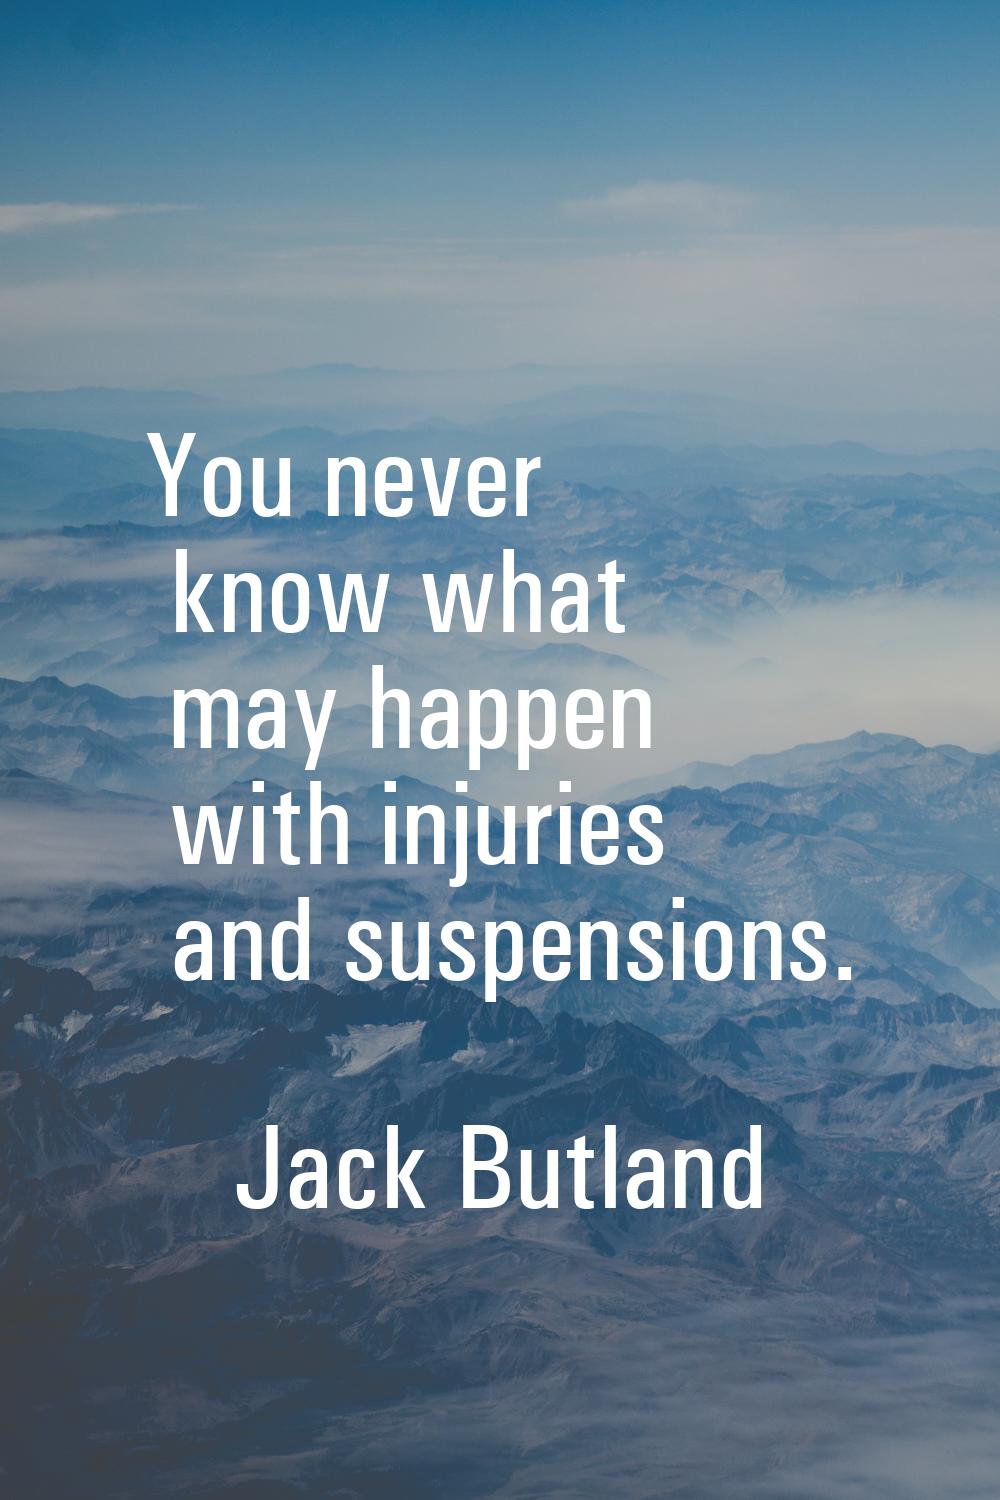 You never know what may happen with injuries and suspensions.